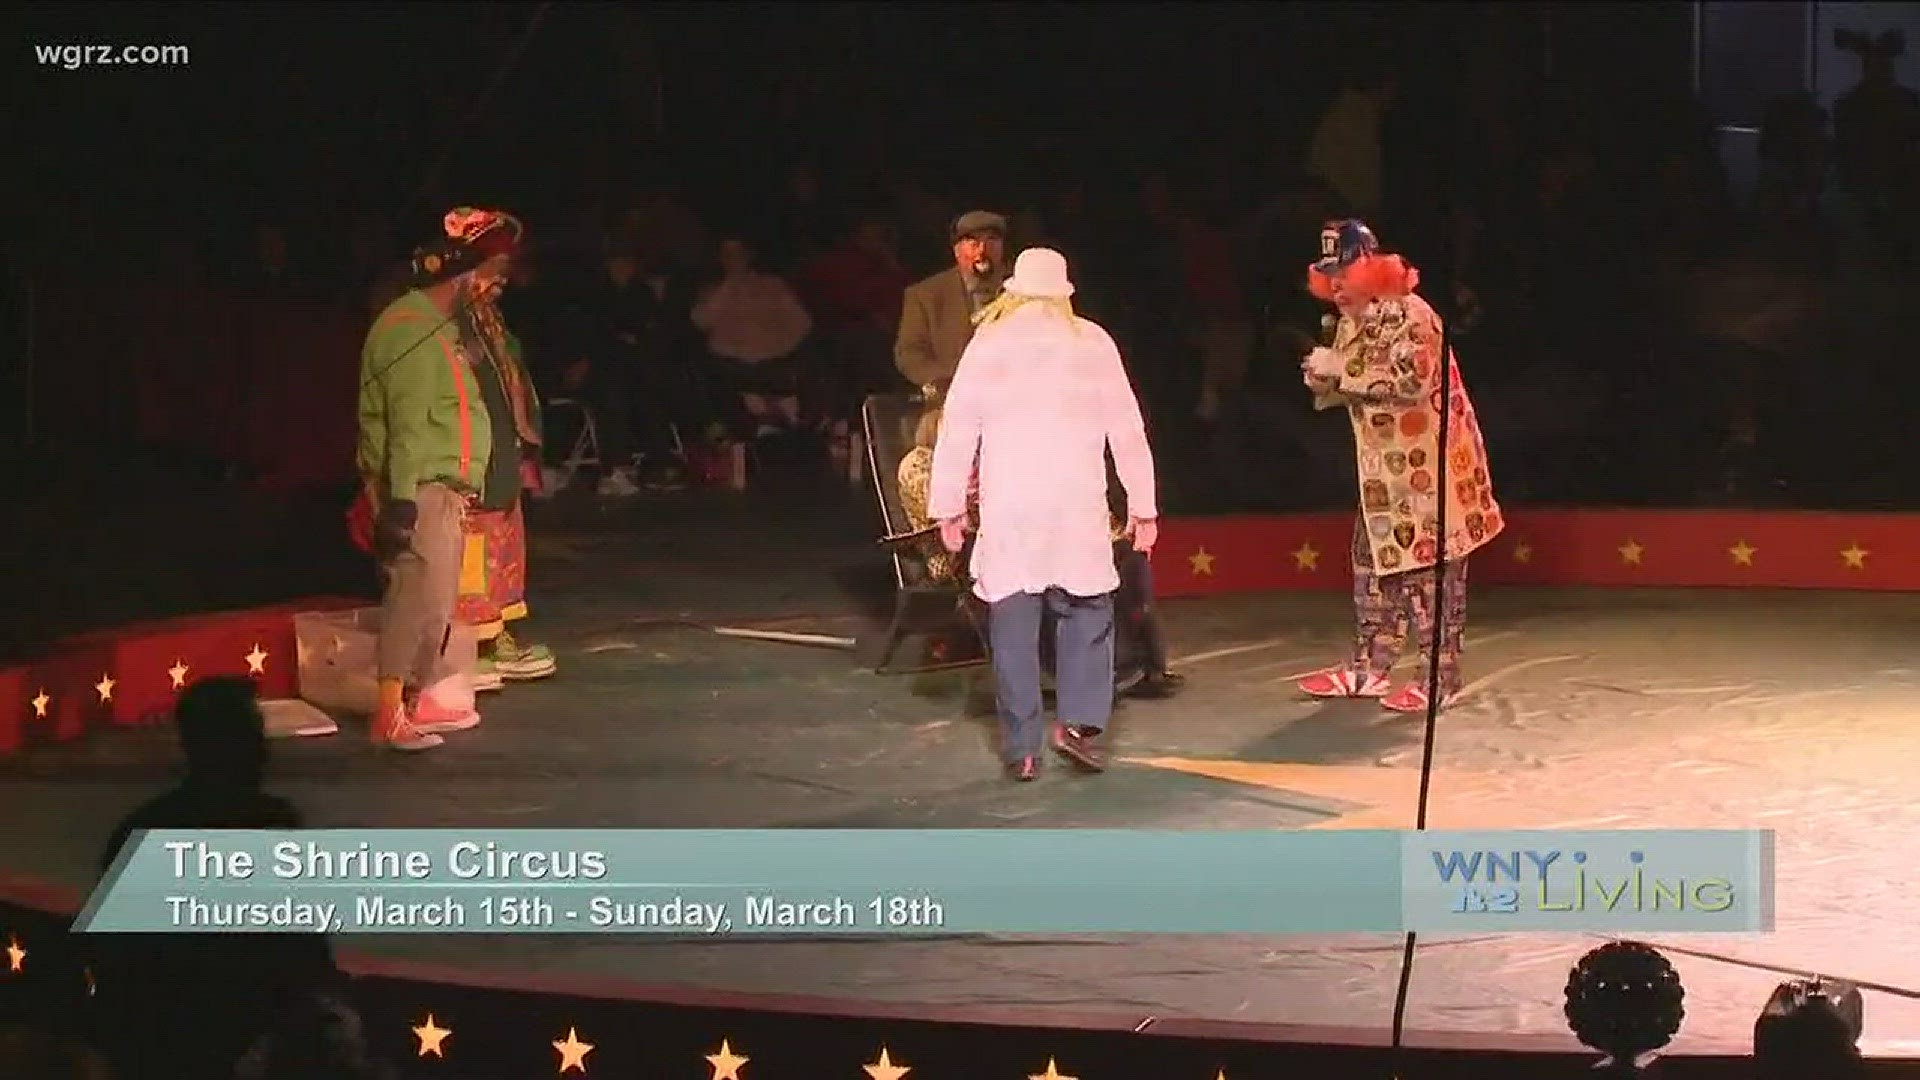 WNY Living - March 12 - The Shrine Circus